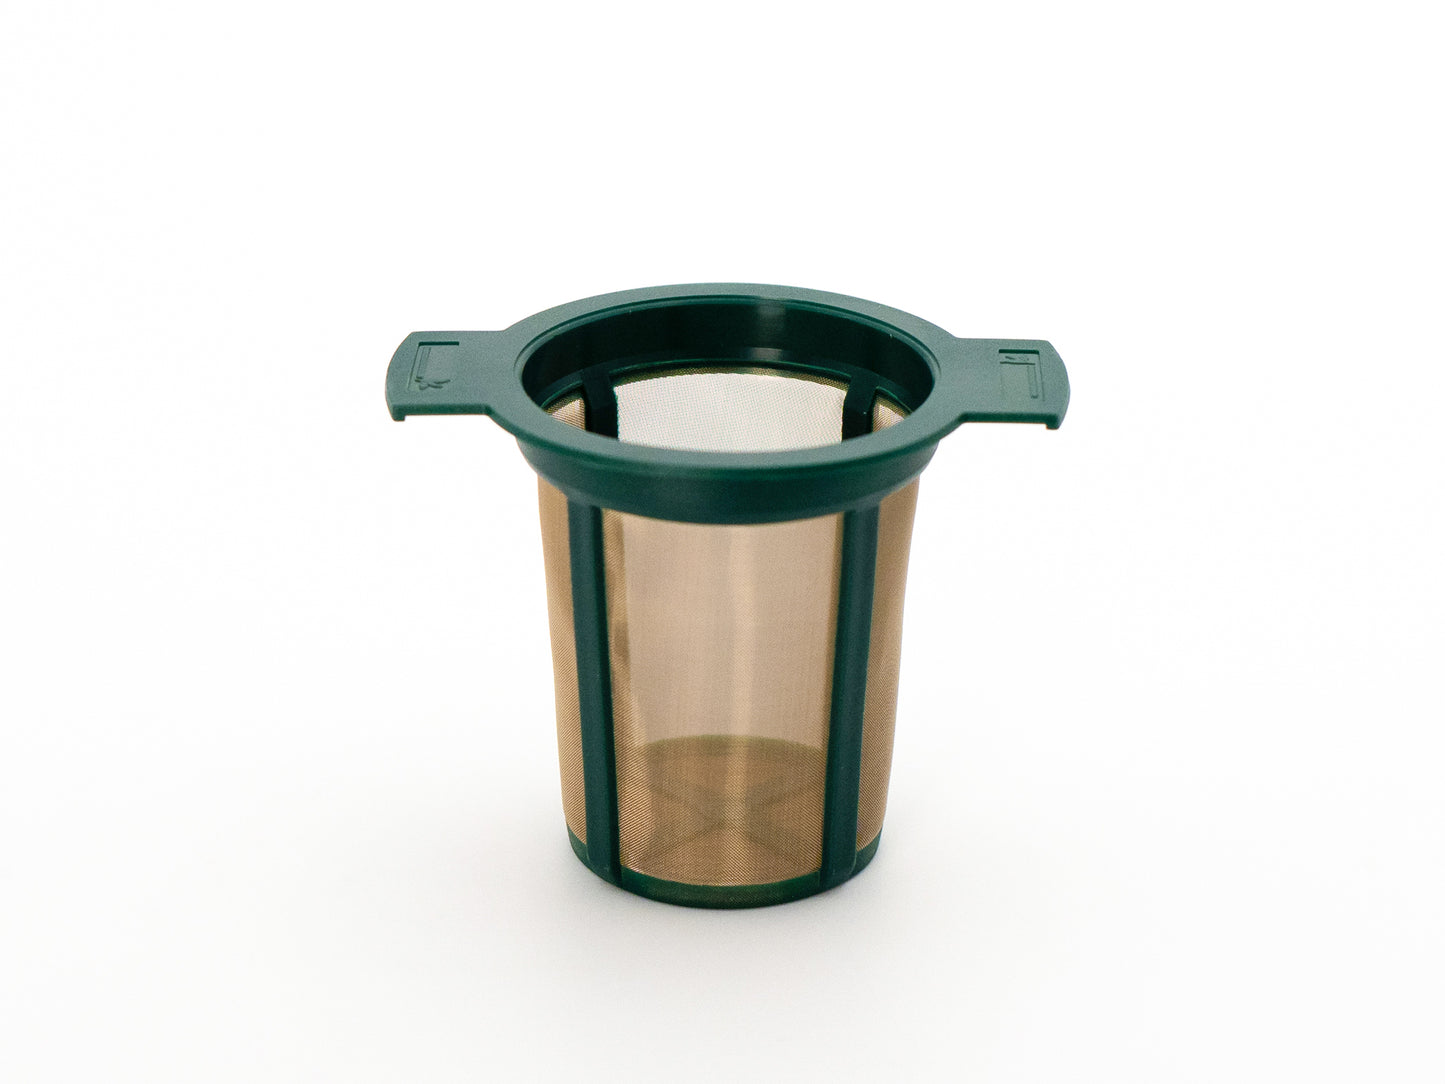 Permanent tea infuser basket with a stainless steel micro fine mesh